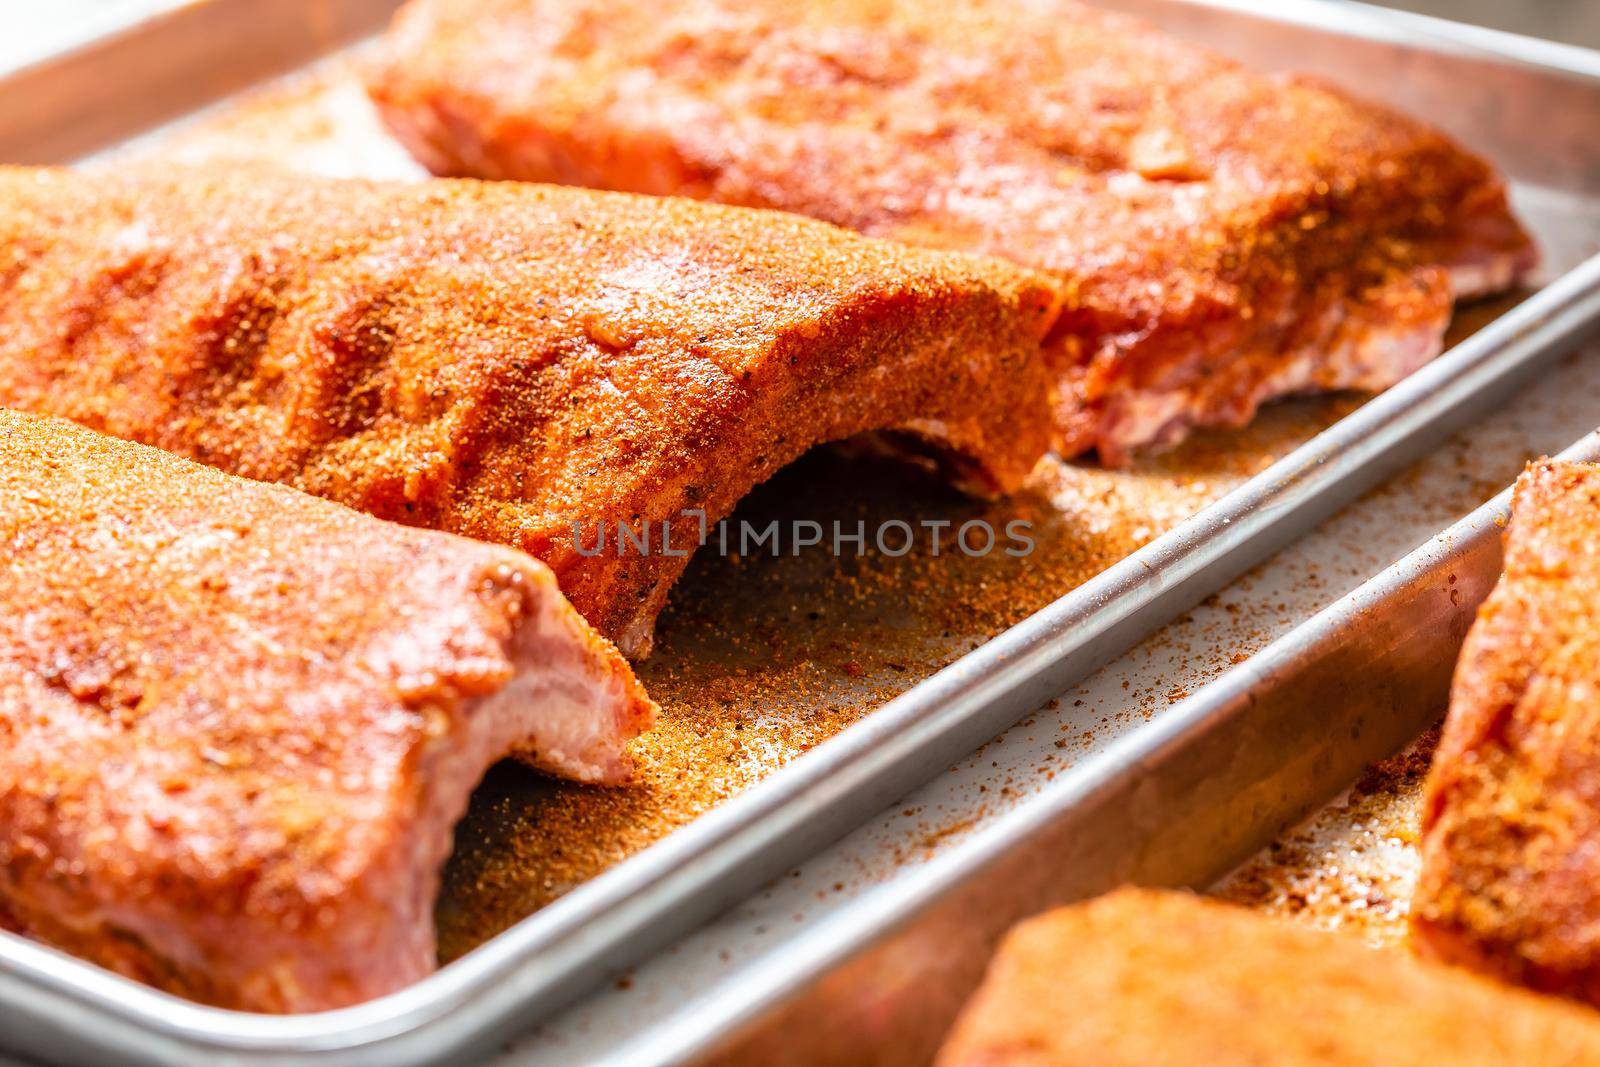 Raw St Louis Style BBQ Ribs with Rub Ready to Cook